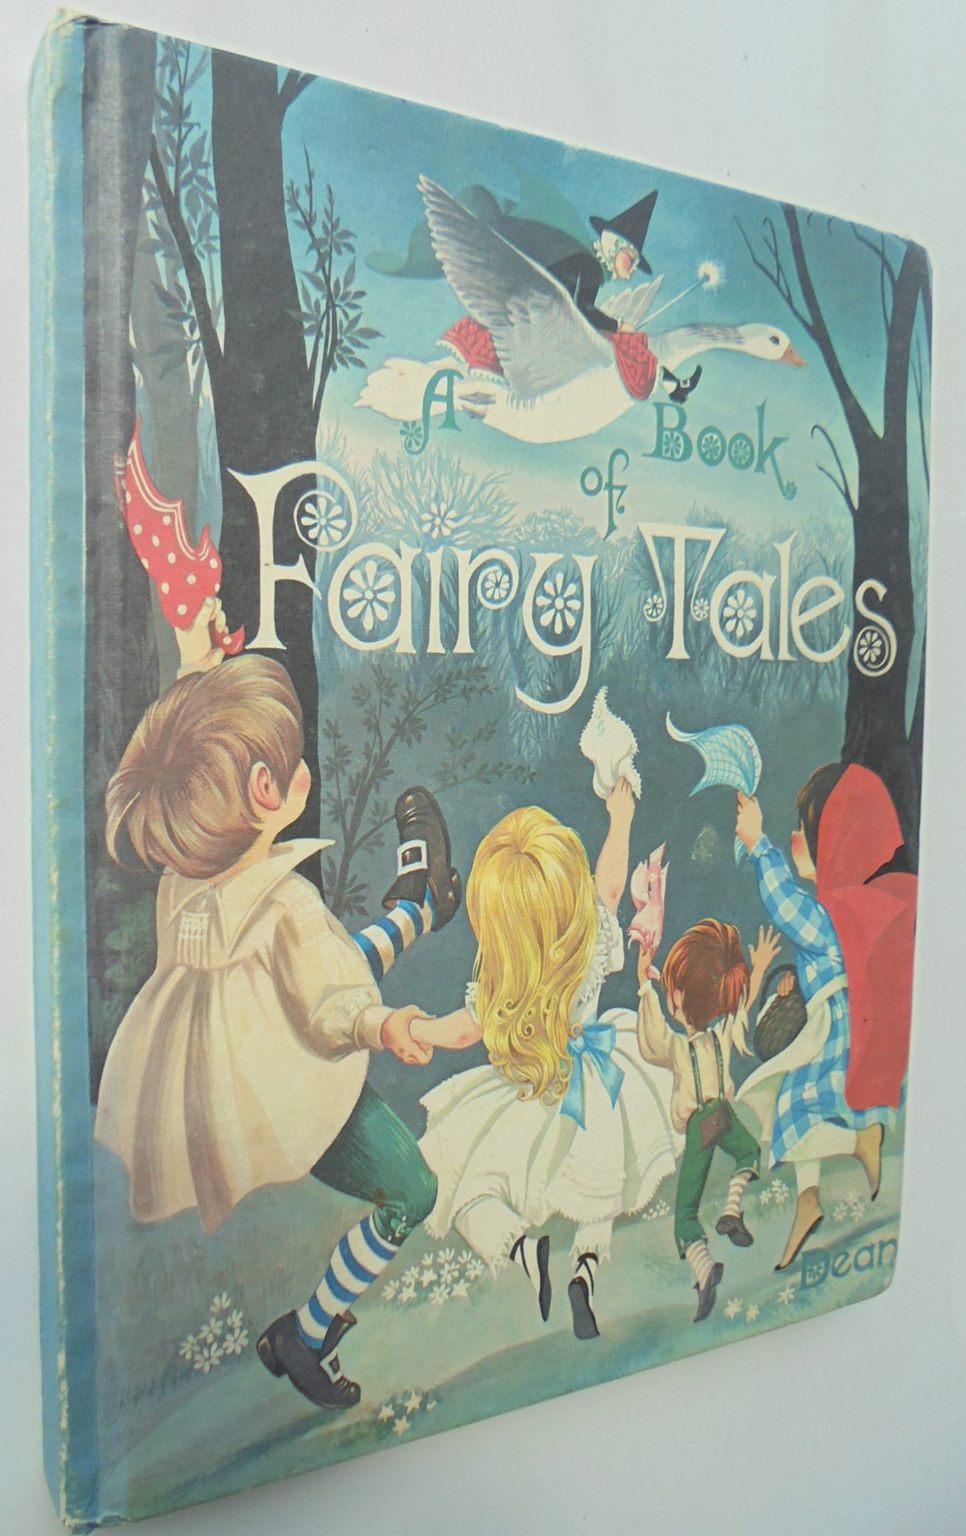 (Dean's) A Book of Fairy Tales by Janet & Anne Grahame-Johnstone.